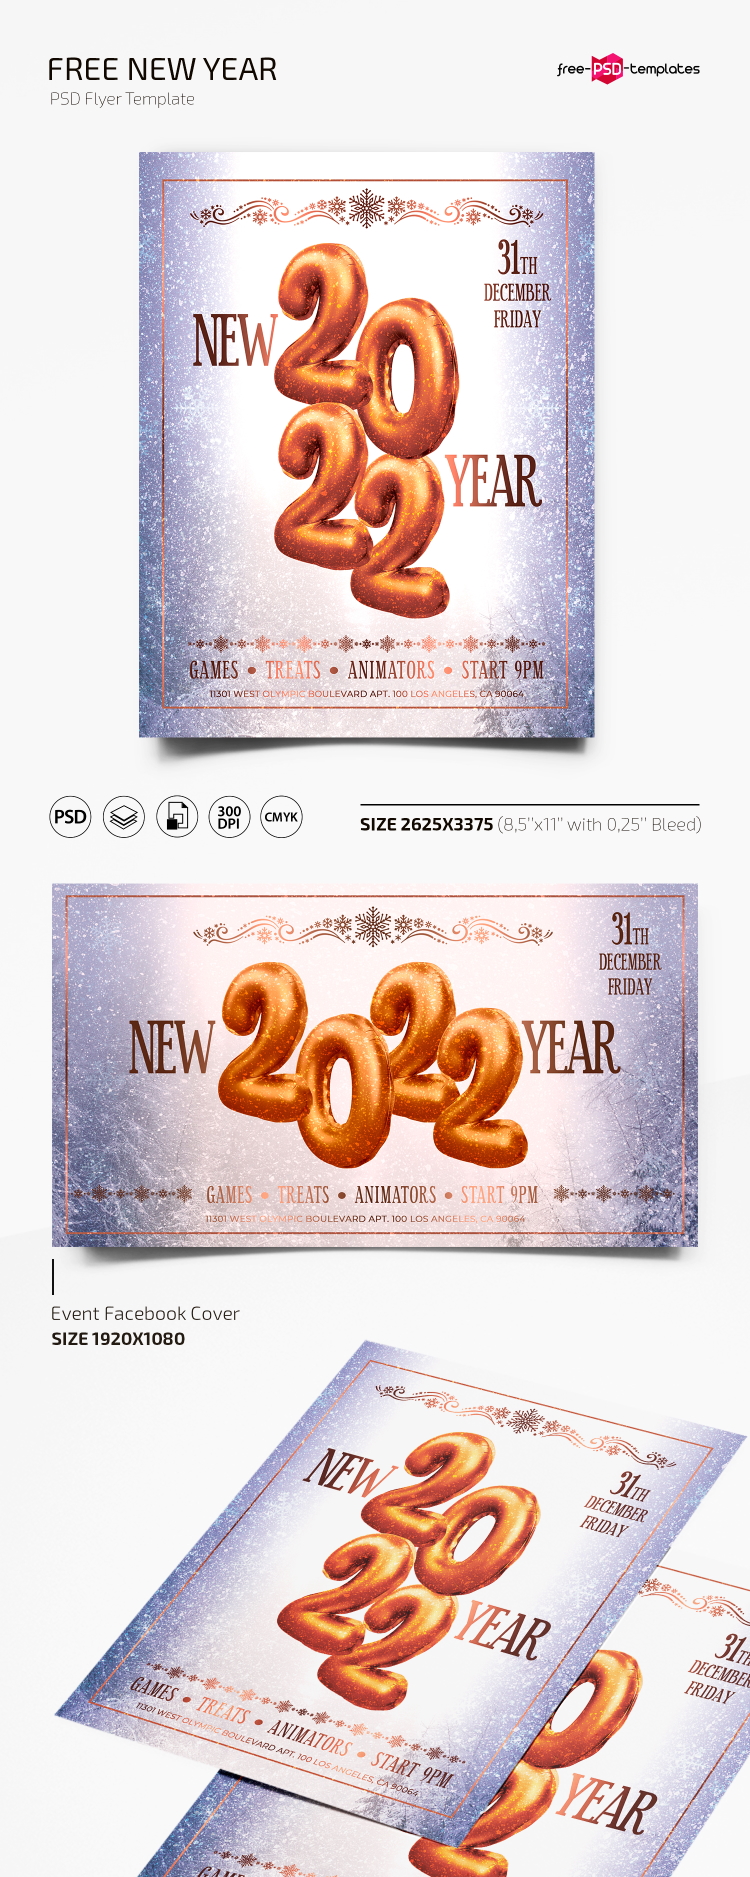 psd templates free download 2022